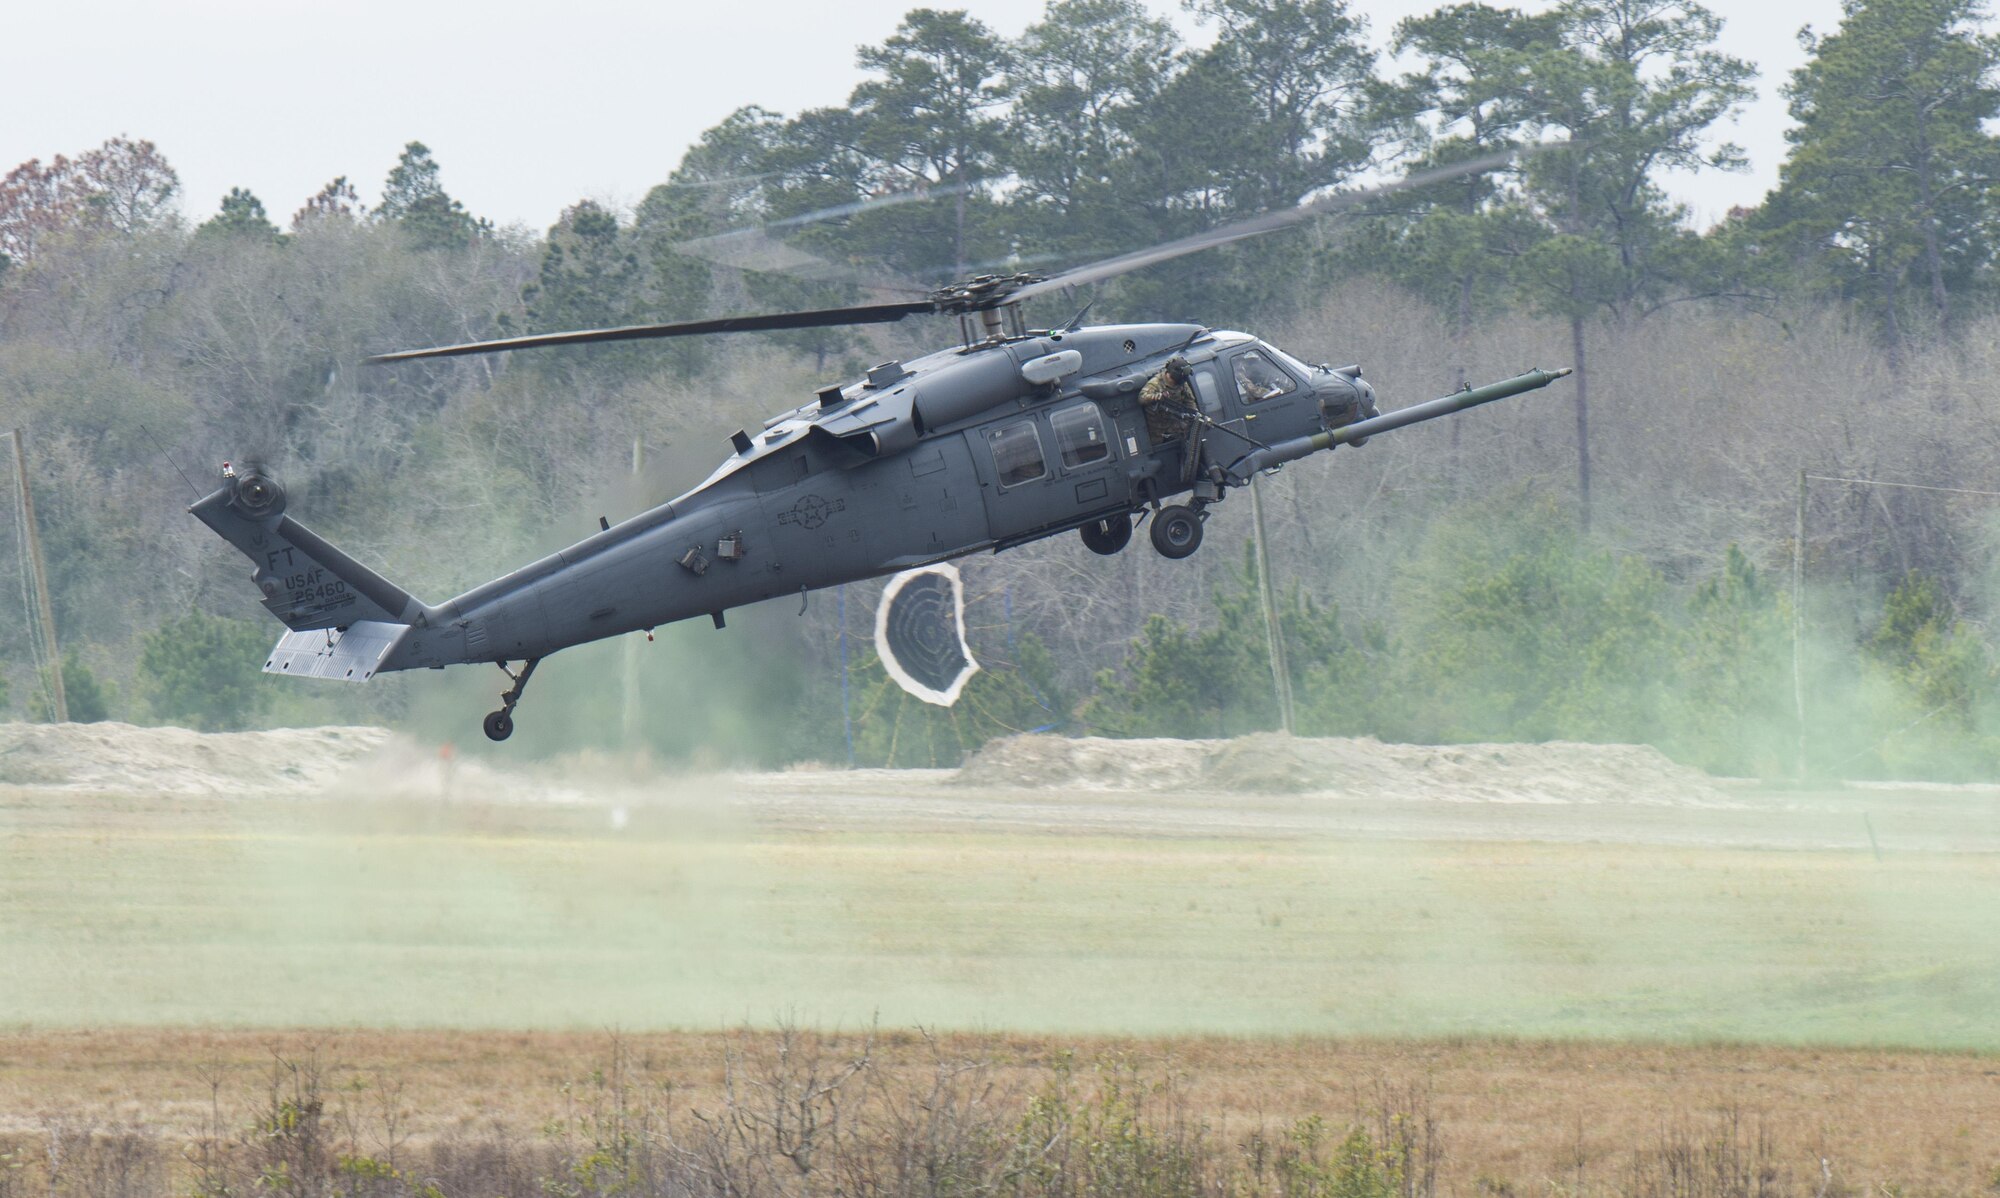 An HH-60 Pave Hawk lands for a simulated rescue on Grand Bay Bombing and Gunnery Range at Moody Air Force Base, Ga., Feb. 18, 2016. Multiple U.S. Air Force aircraft within Air Combat Command conducted joint aerial training that showcased the aircrafts tactical air and ground maneuvers, as well as its weapons capabilities. (U.S. Air Force photo by Staff Sgt. Brian J. Valencia/Released)